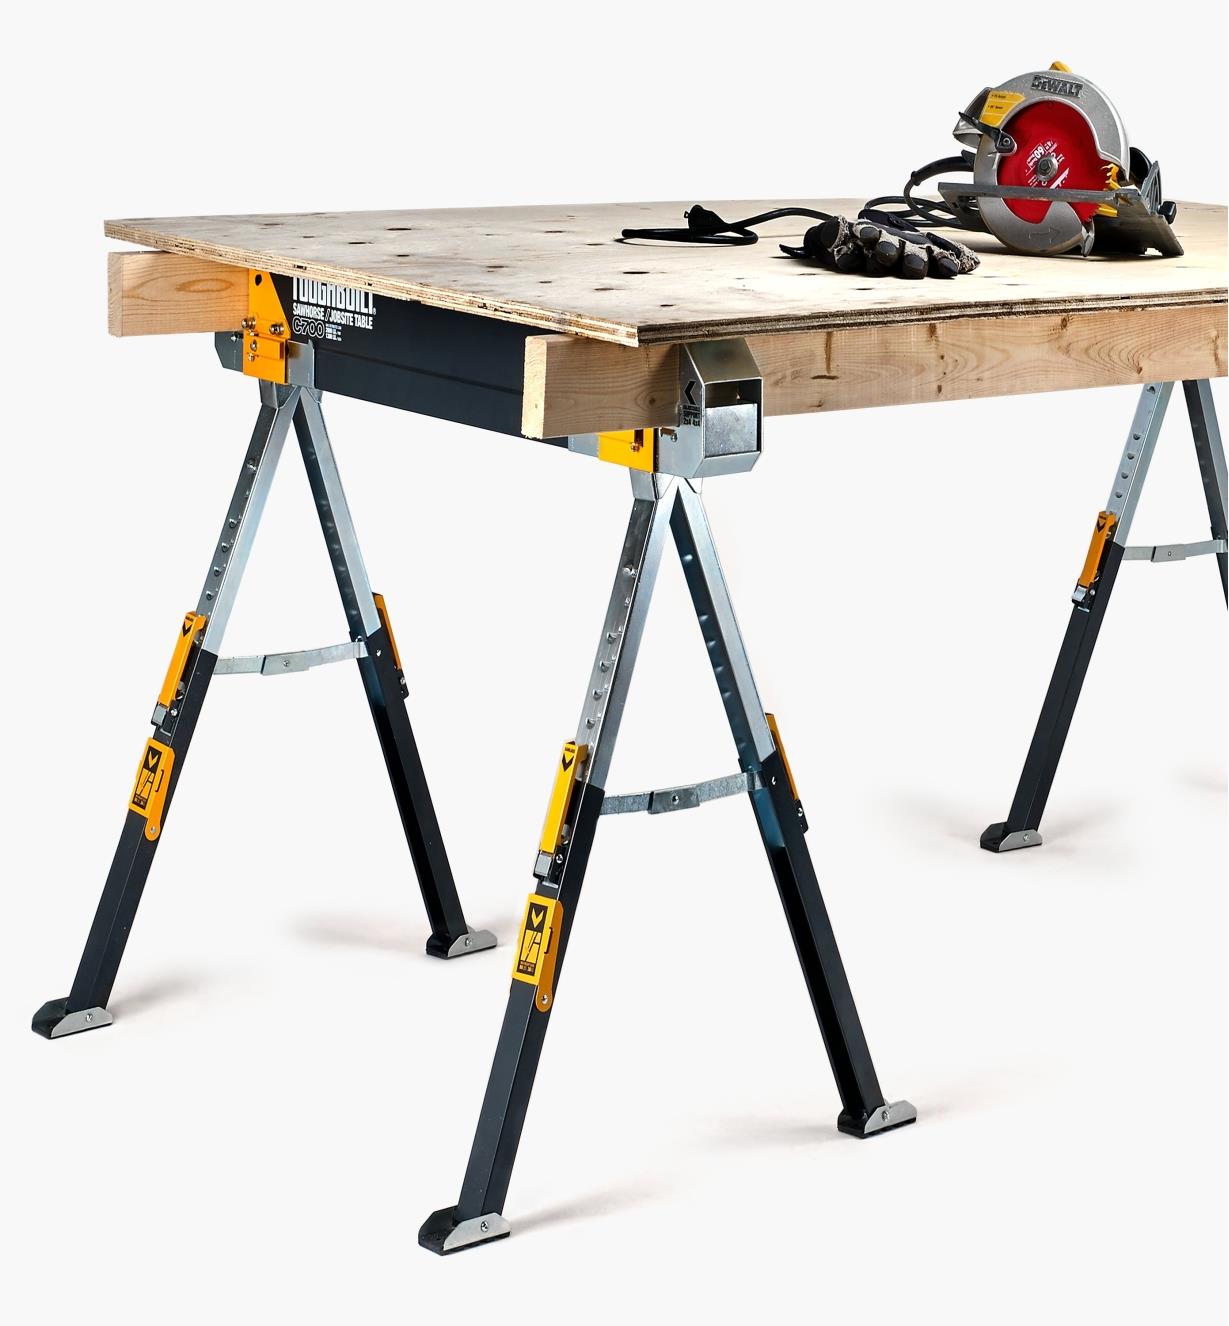 A pair of 2×4s spanning two C700 sawhorses, topped with a sheet of plywood to create a work table